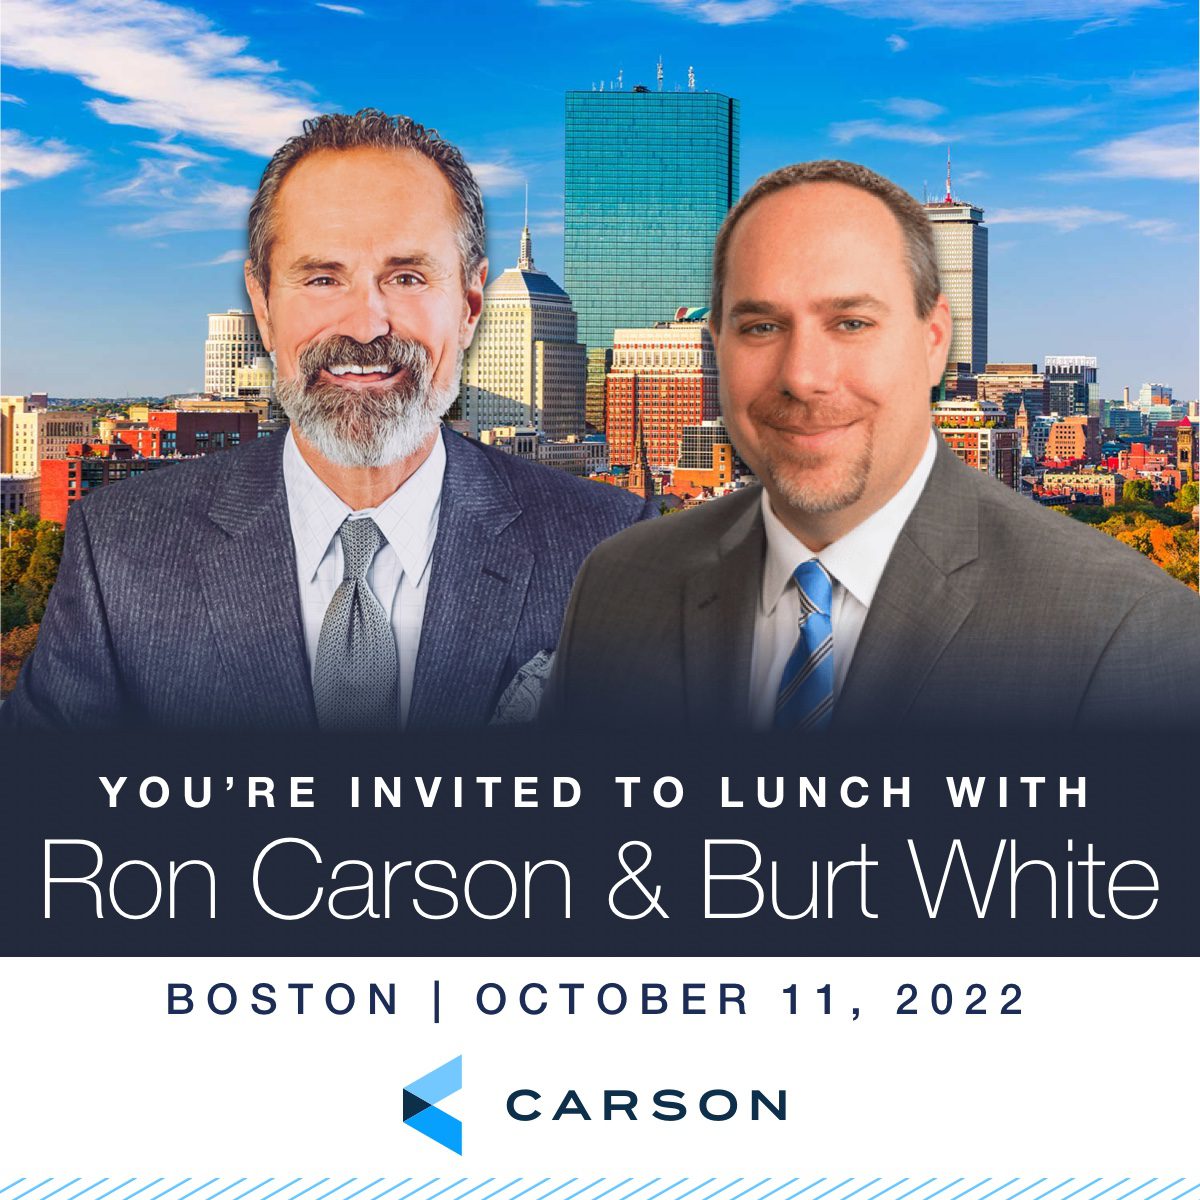 Join Ron Carson and Burt White for Lunch in Boston